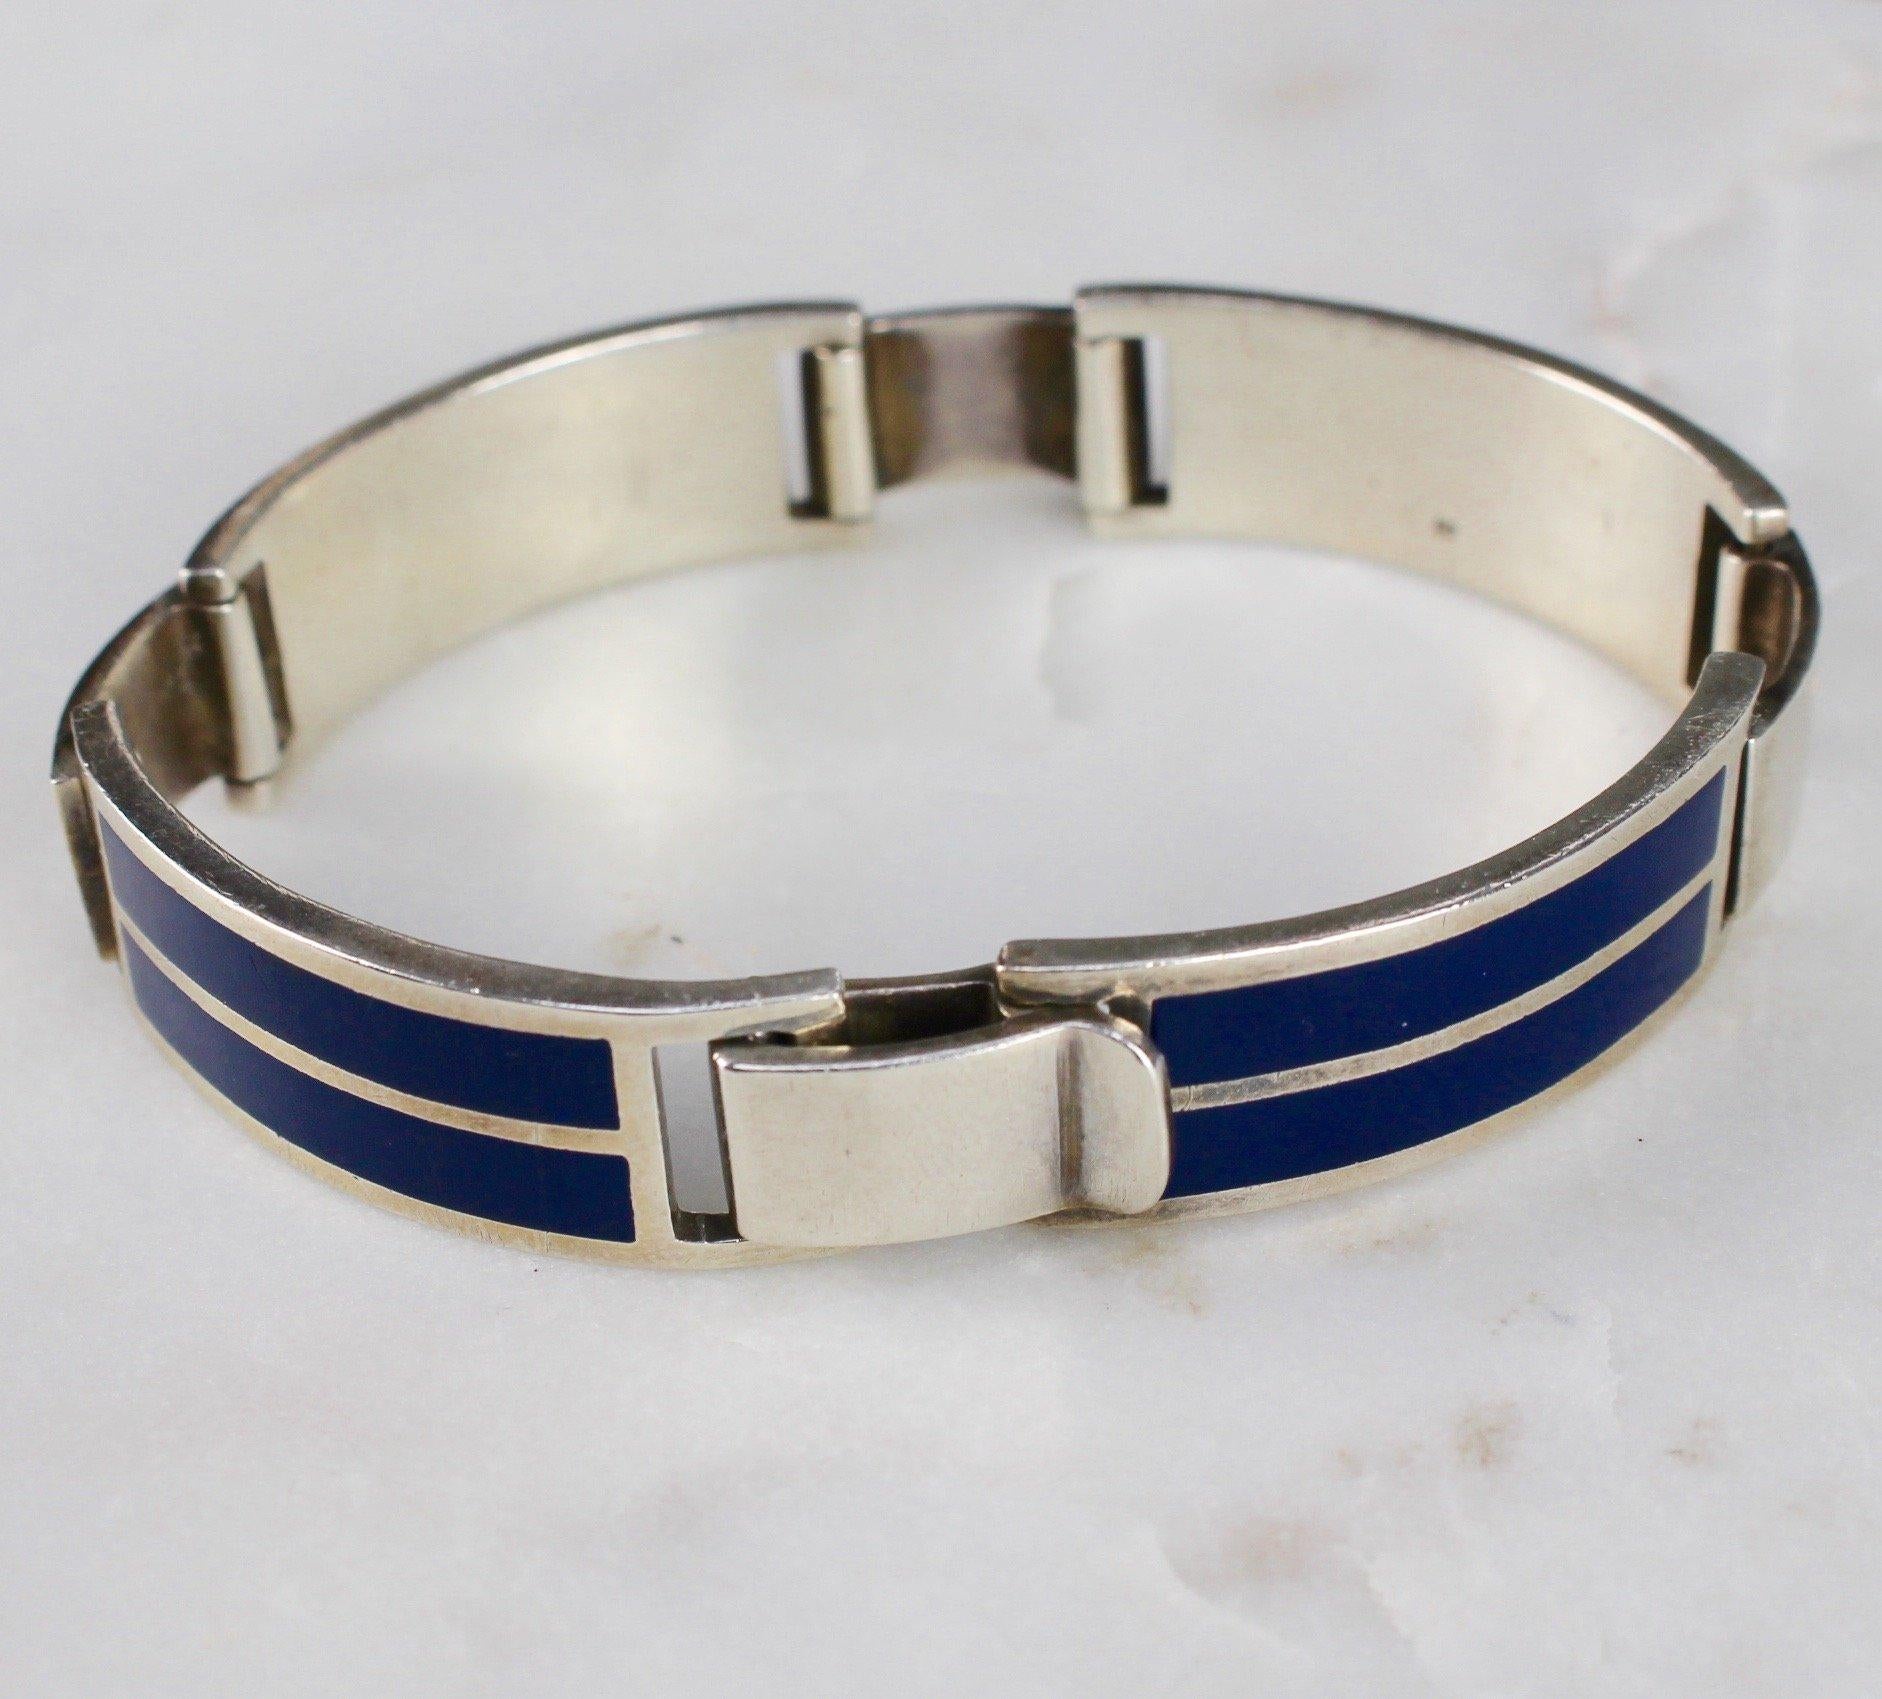 Iconic Gucci sterling silver and enamel bracelet. Mark 'A' indicates 1975. Leopard head mark represents origins of London, England. Sterling silver -lion mark - with blue enamel. Rare vintage piece - very collectable. In very good vintage